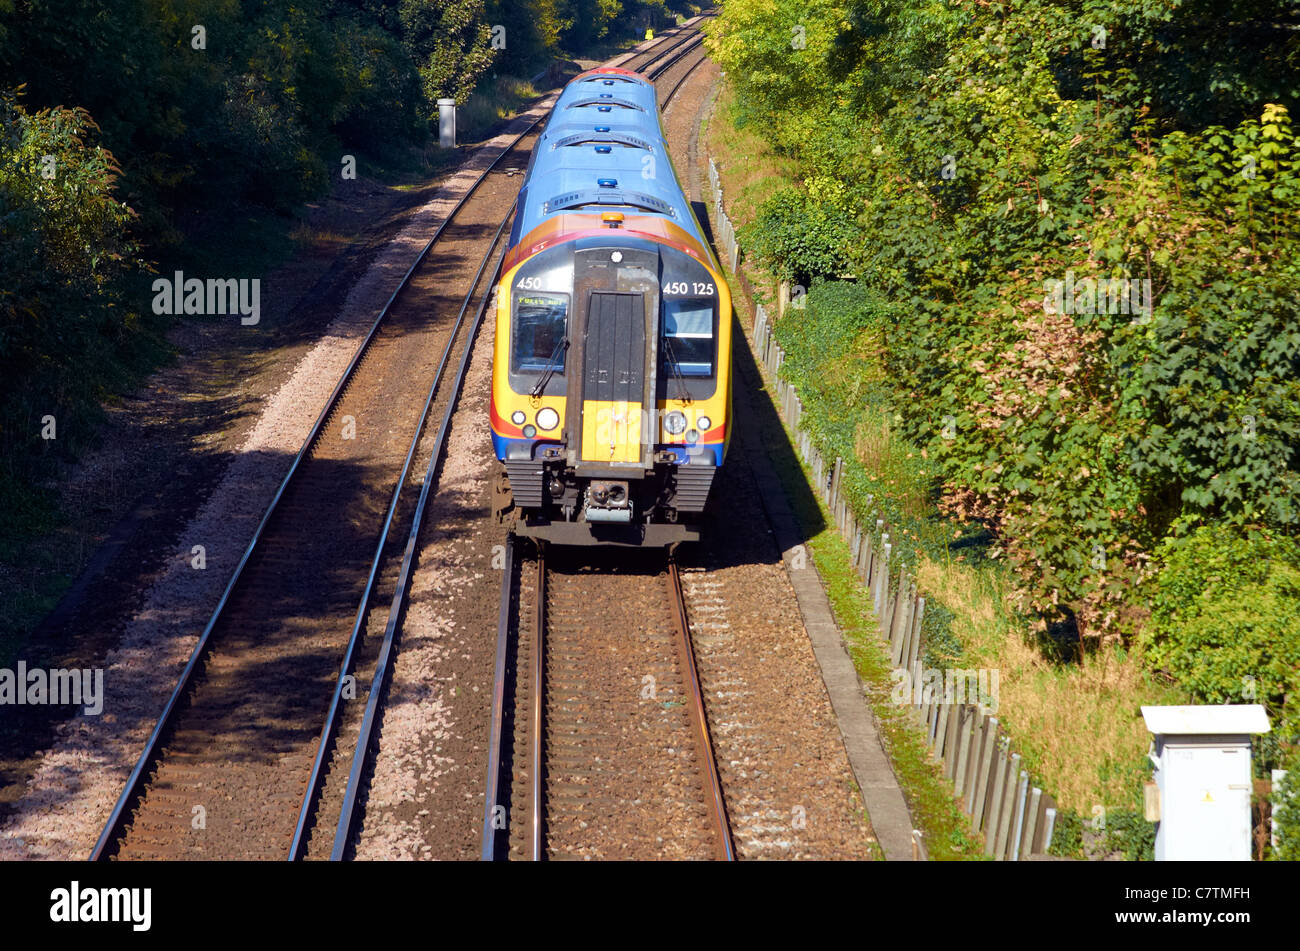 SWT Class 450 electric train on the South Western mainline (London-Bournemouth) just south of Winchester, Hampshire, England. Stock Photo